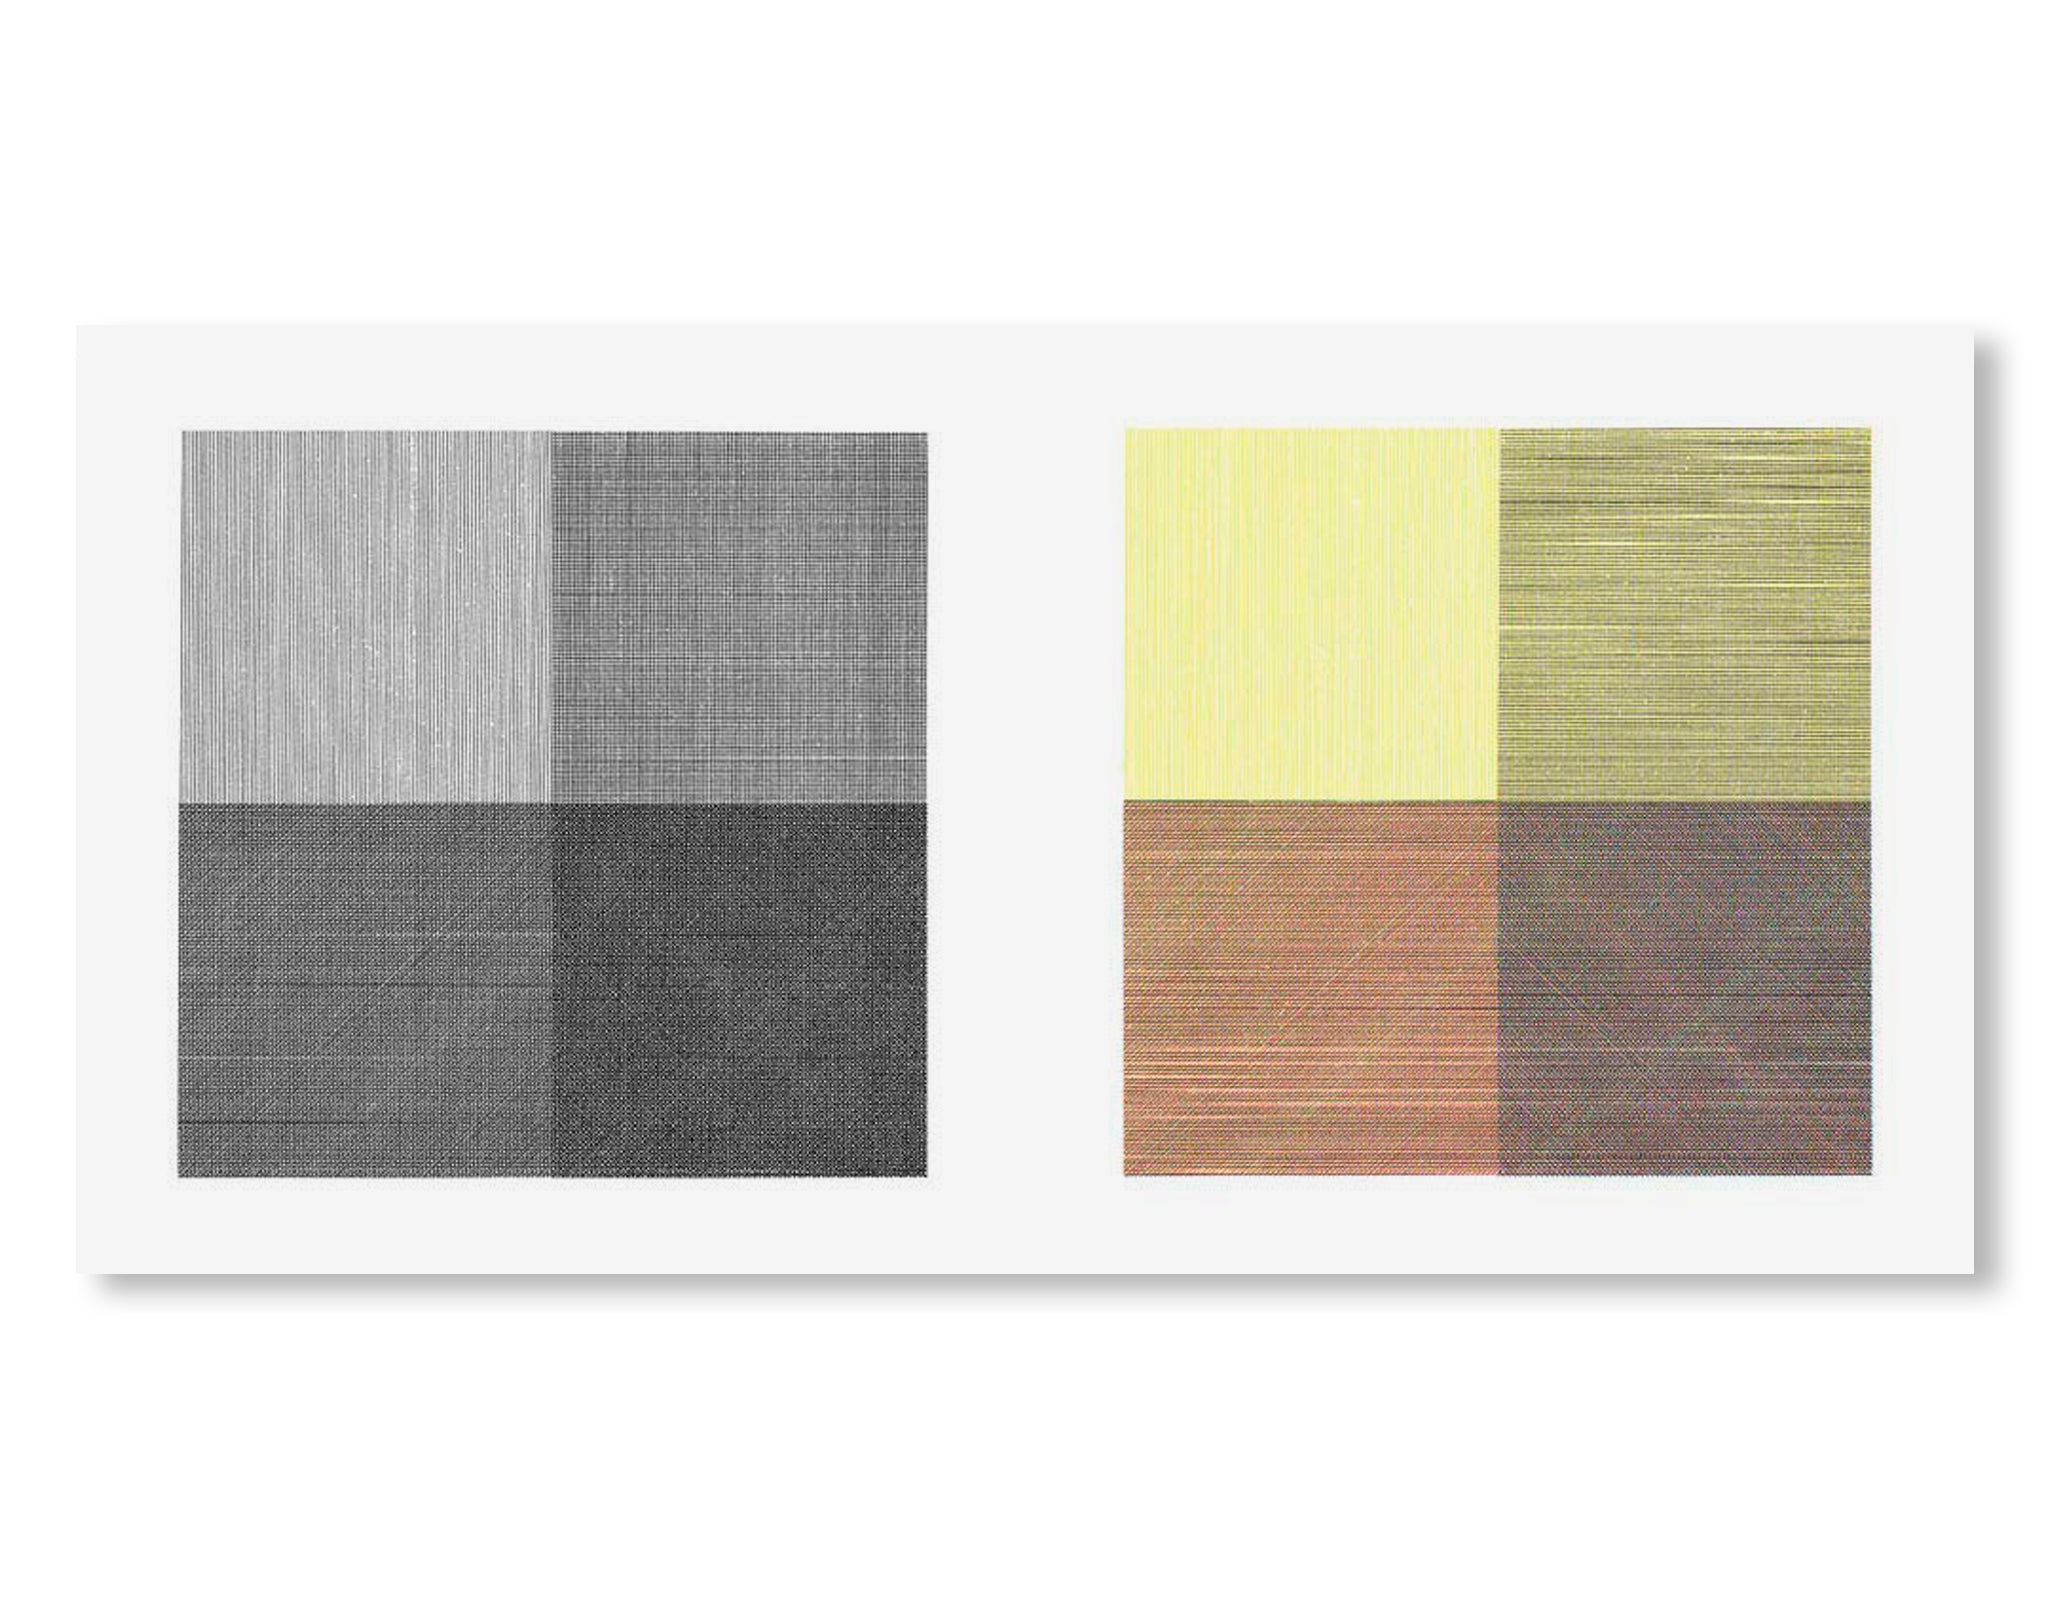 FOUR BASIC KINDS OF LINES & COLOUR by Sol LeWitt